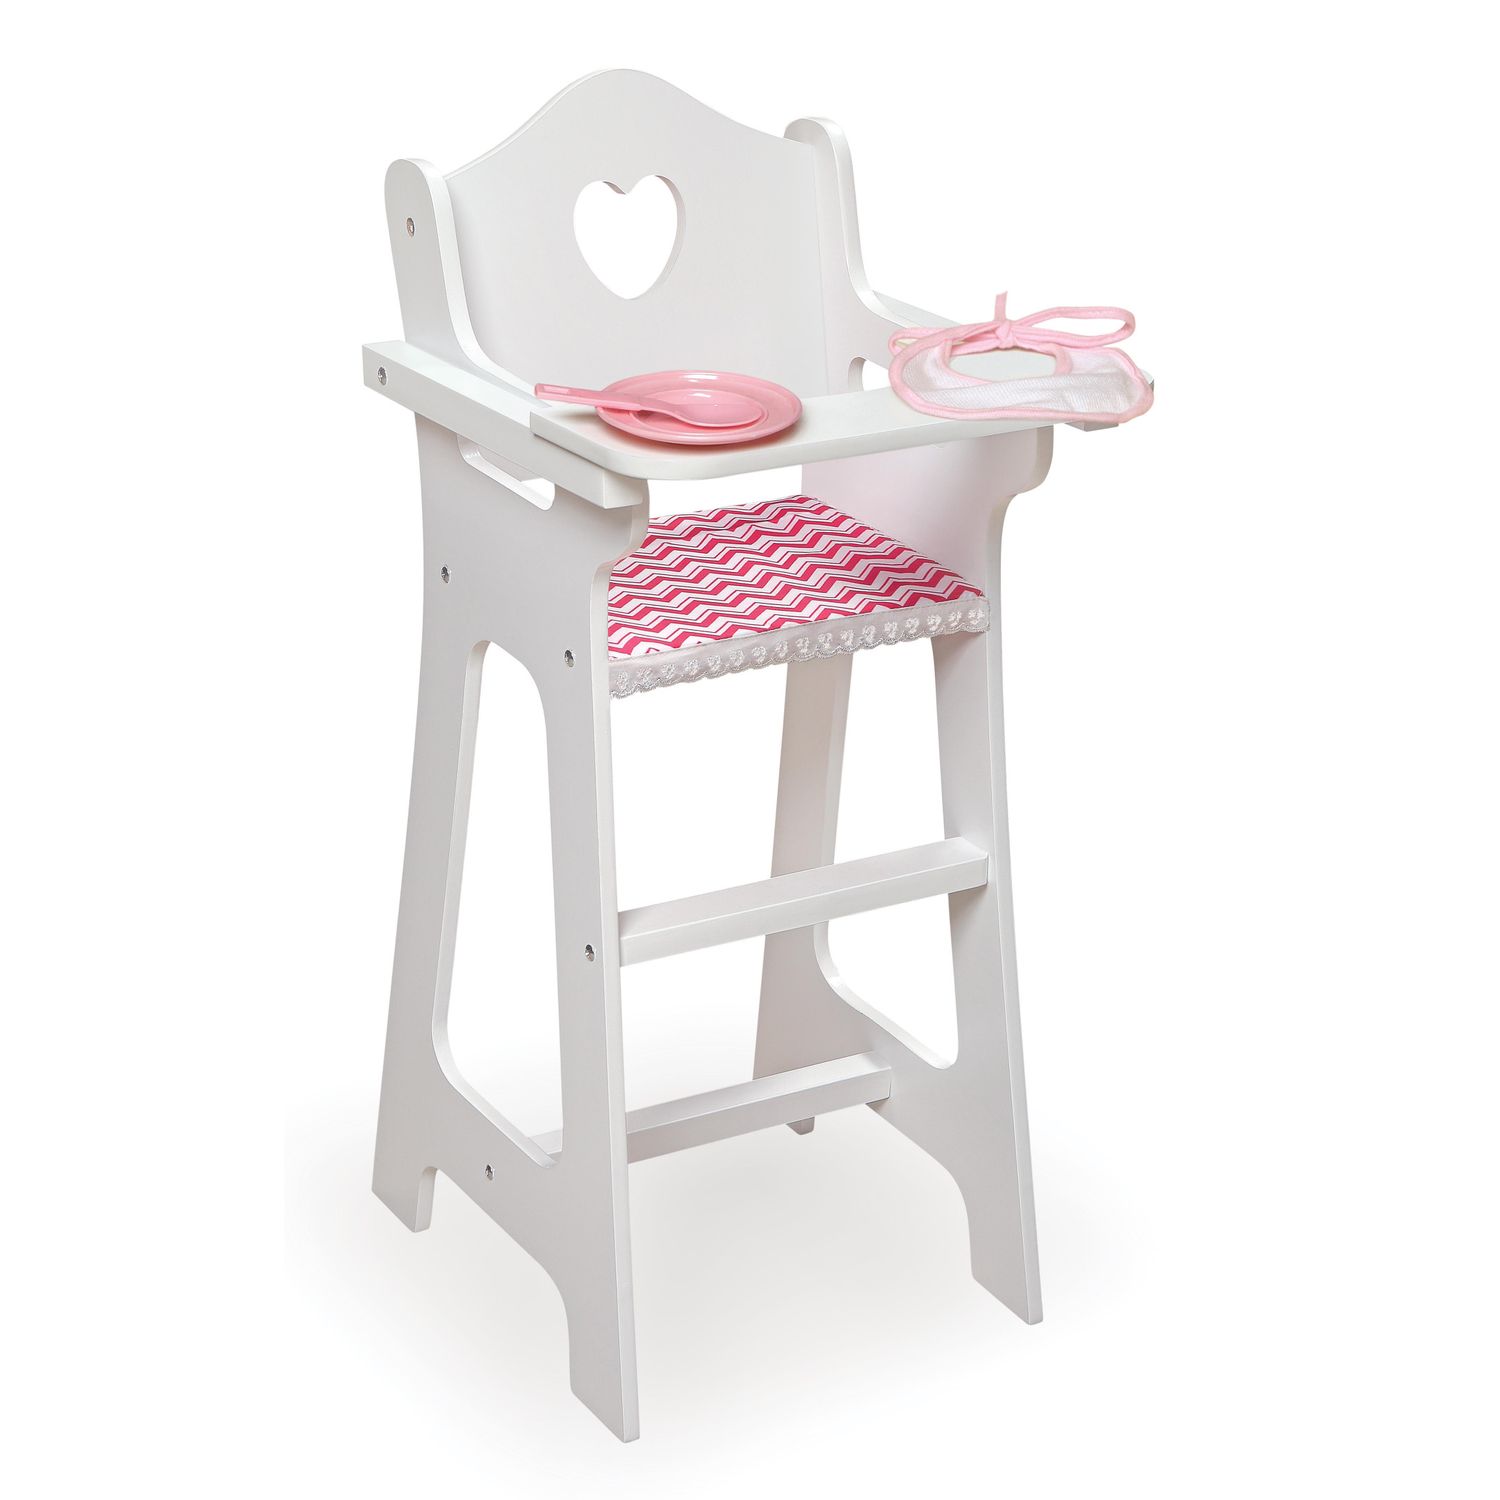 wooden baby doll high chair